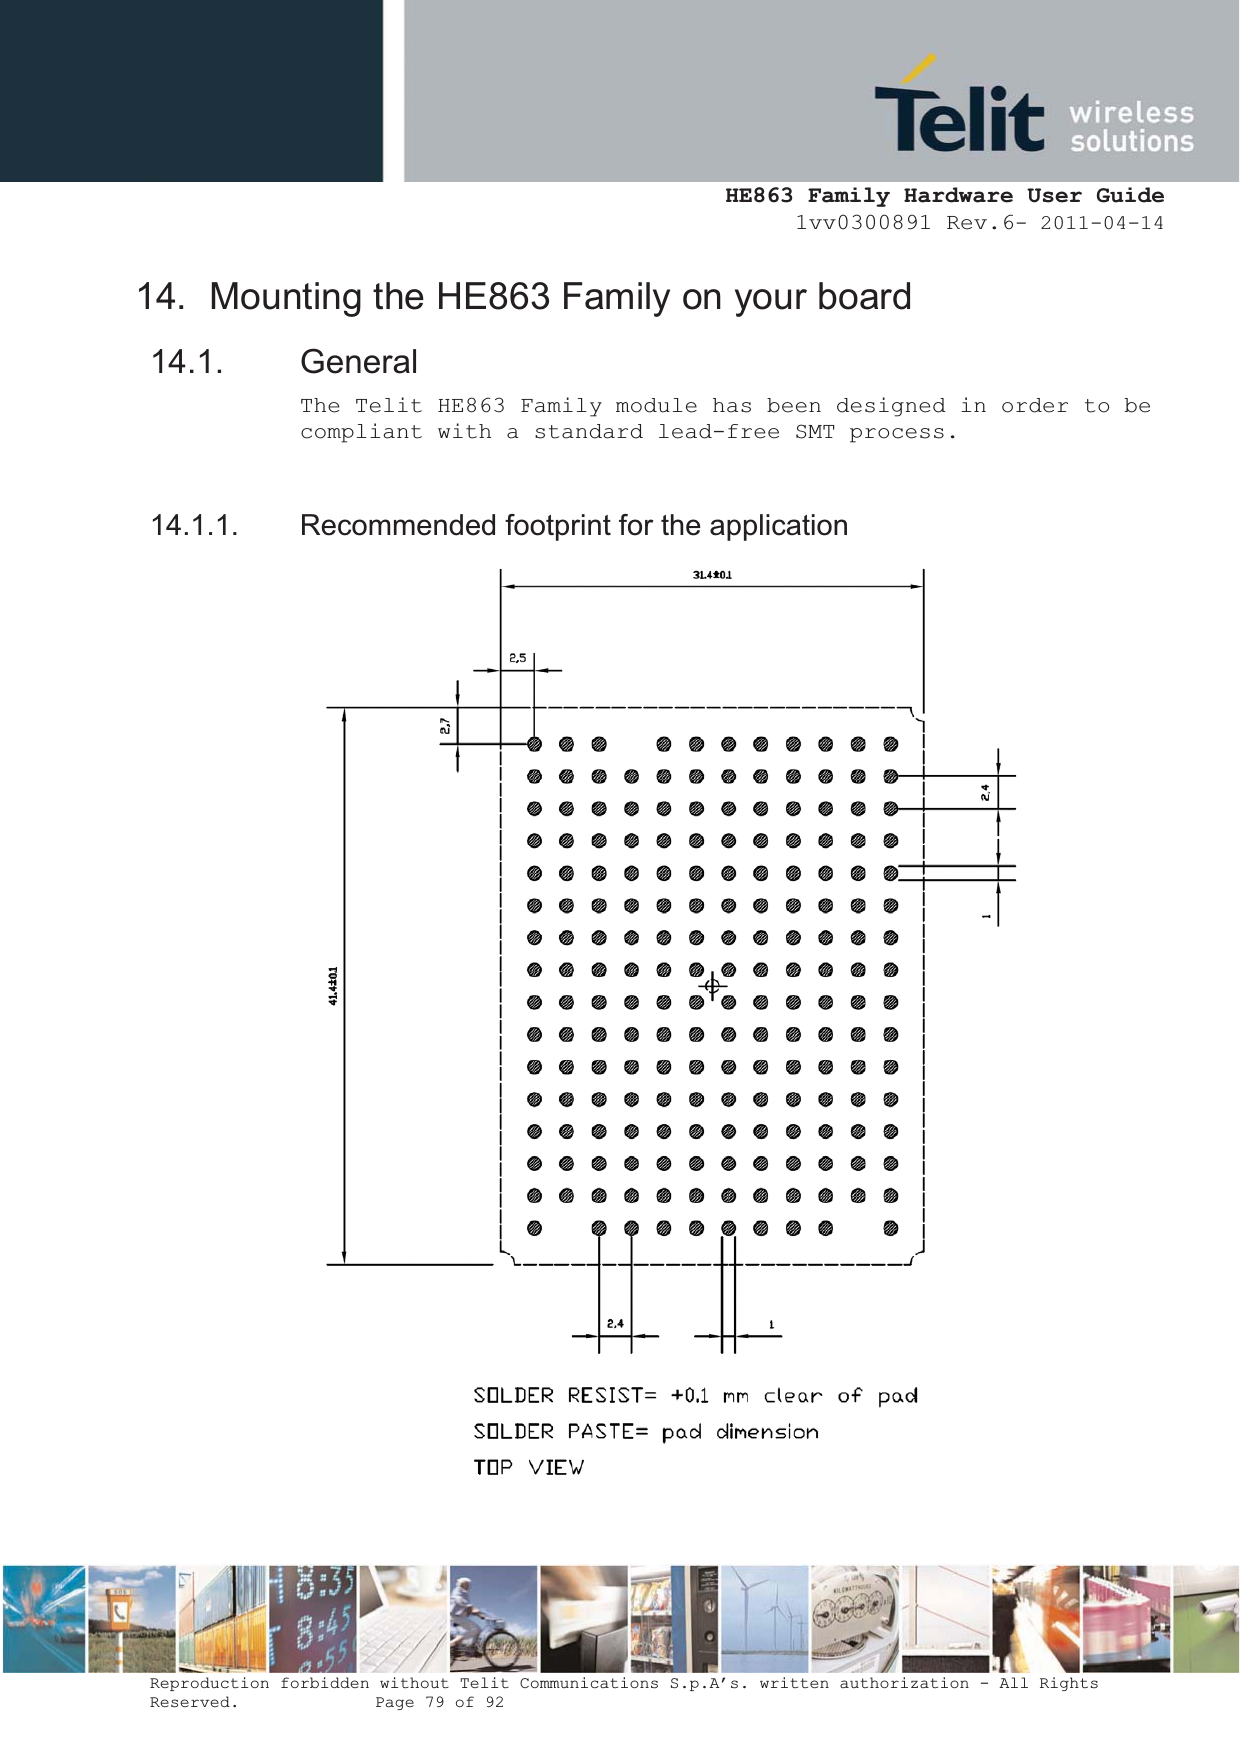  HE863 Family Hardware User Guide 1vv0300891 Rev.6- 2011-04-14    Reproduction forbidden without Telit Communications S.p.A’s. written authorization - All Rights Reserved.    Page 79 of 92  14.  Mounting the HE863 Family on your board 14.1. General The Telit HE863 Family module has been designed in order to be compliant with a standard lead-free SMT process.  14.1.1.  Recommended footprint for the application  